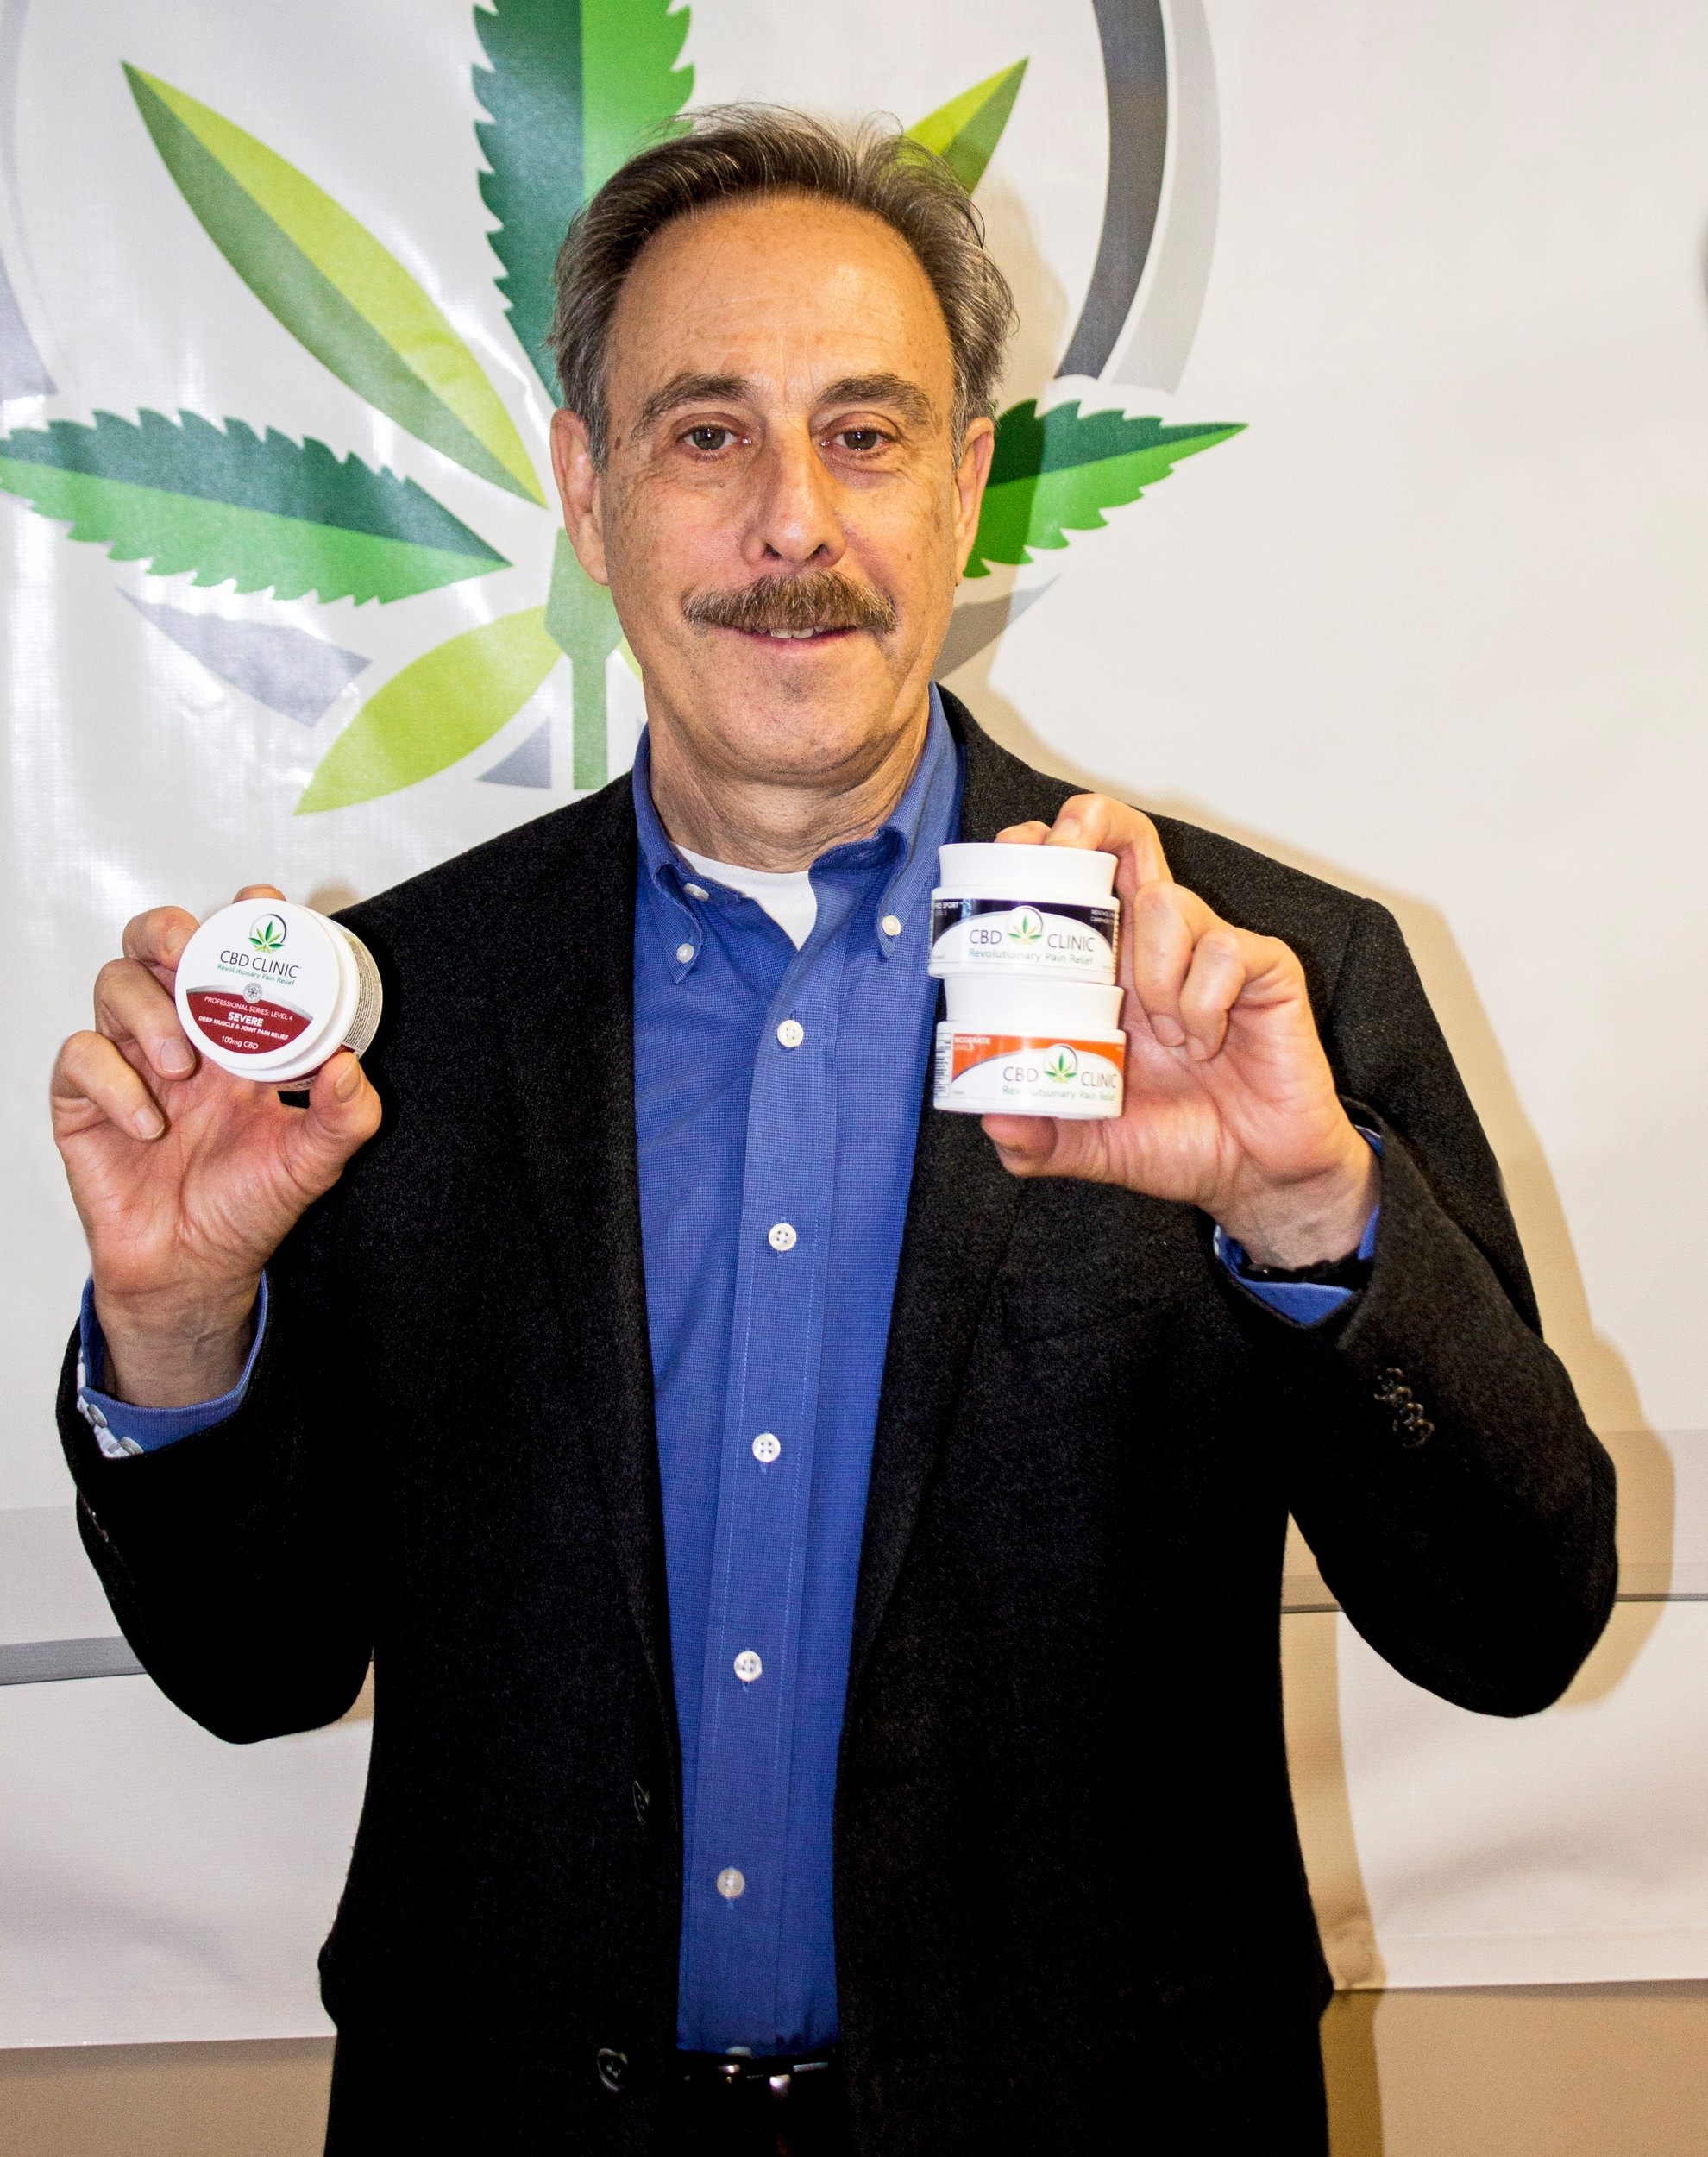 David Goldsmith, whose firm, CBD Clinic, has developed a new, non-prescription topical product to help relieve chronic pain, using CBD extract from marijuana, proudly displaying jars of his new product.